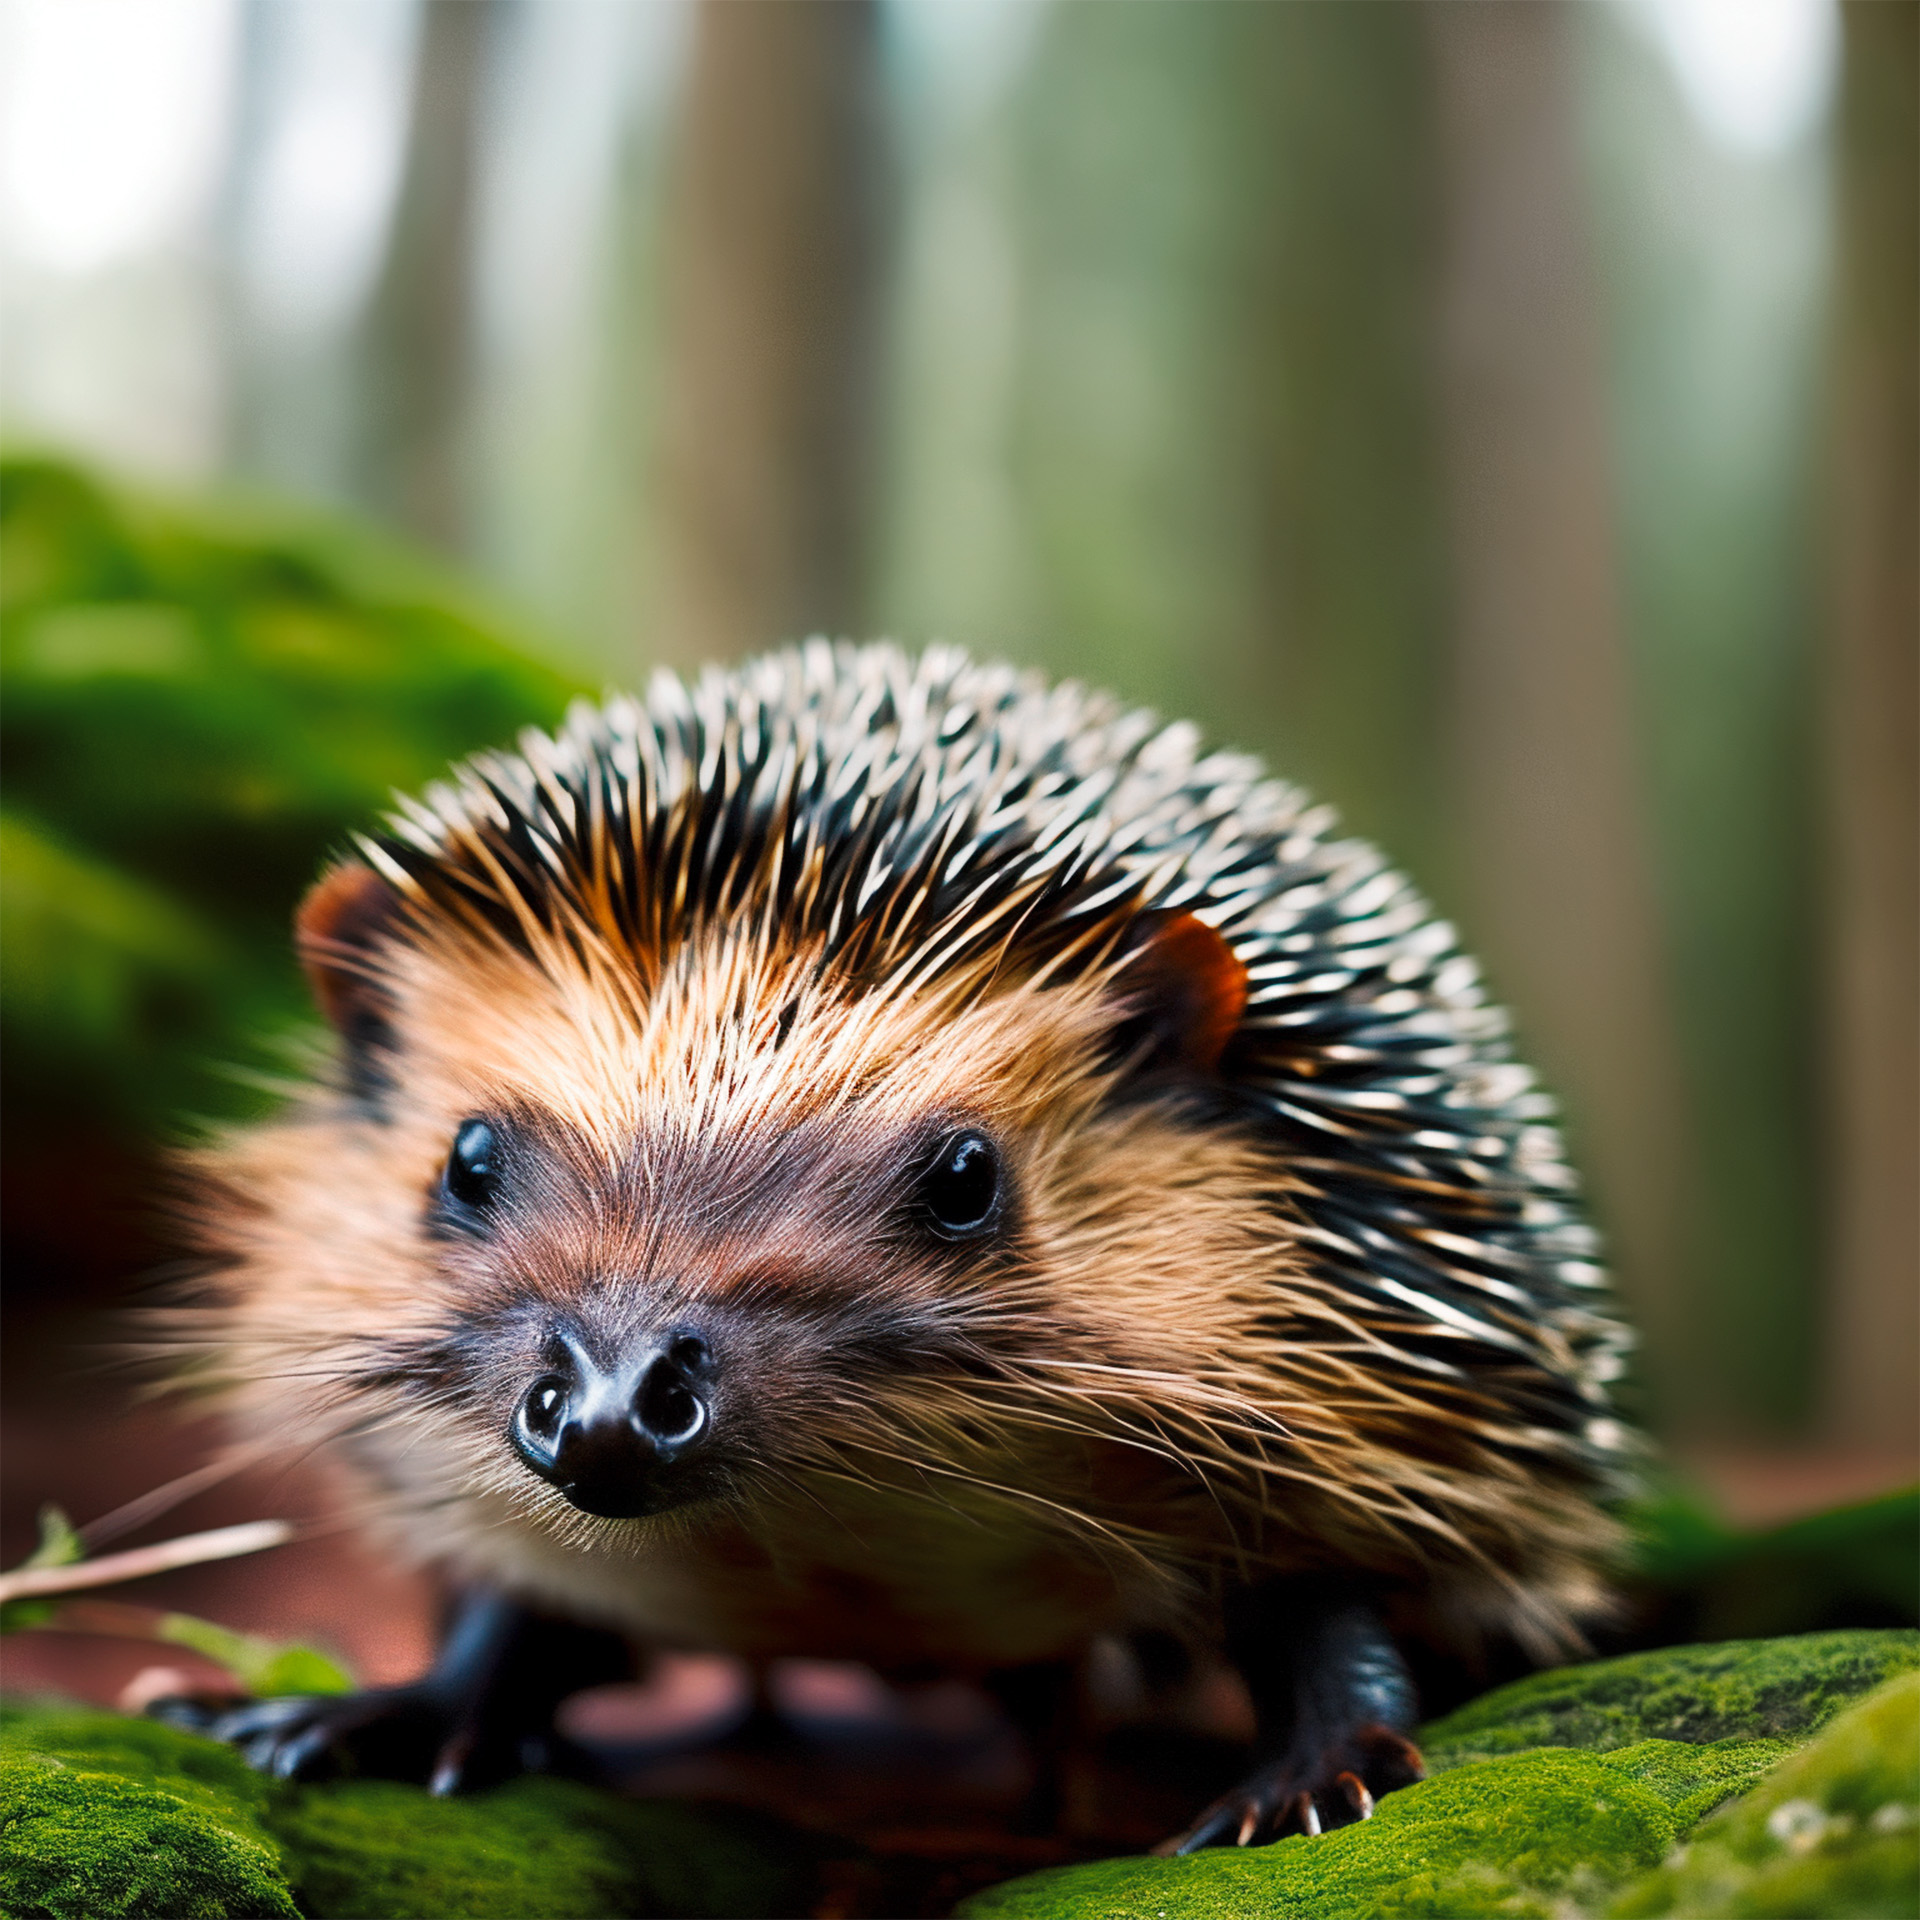 00000-4207303413-naturitize (low angle_1.1) macro photography of (Hedgehog_1.2), Mossy Broad-leaved Forest, ,landscape with unity, Summer Heatwav